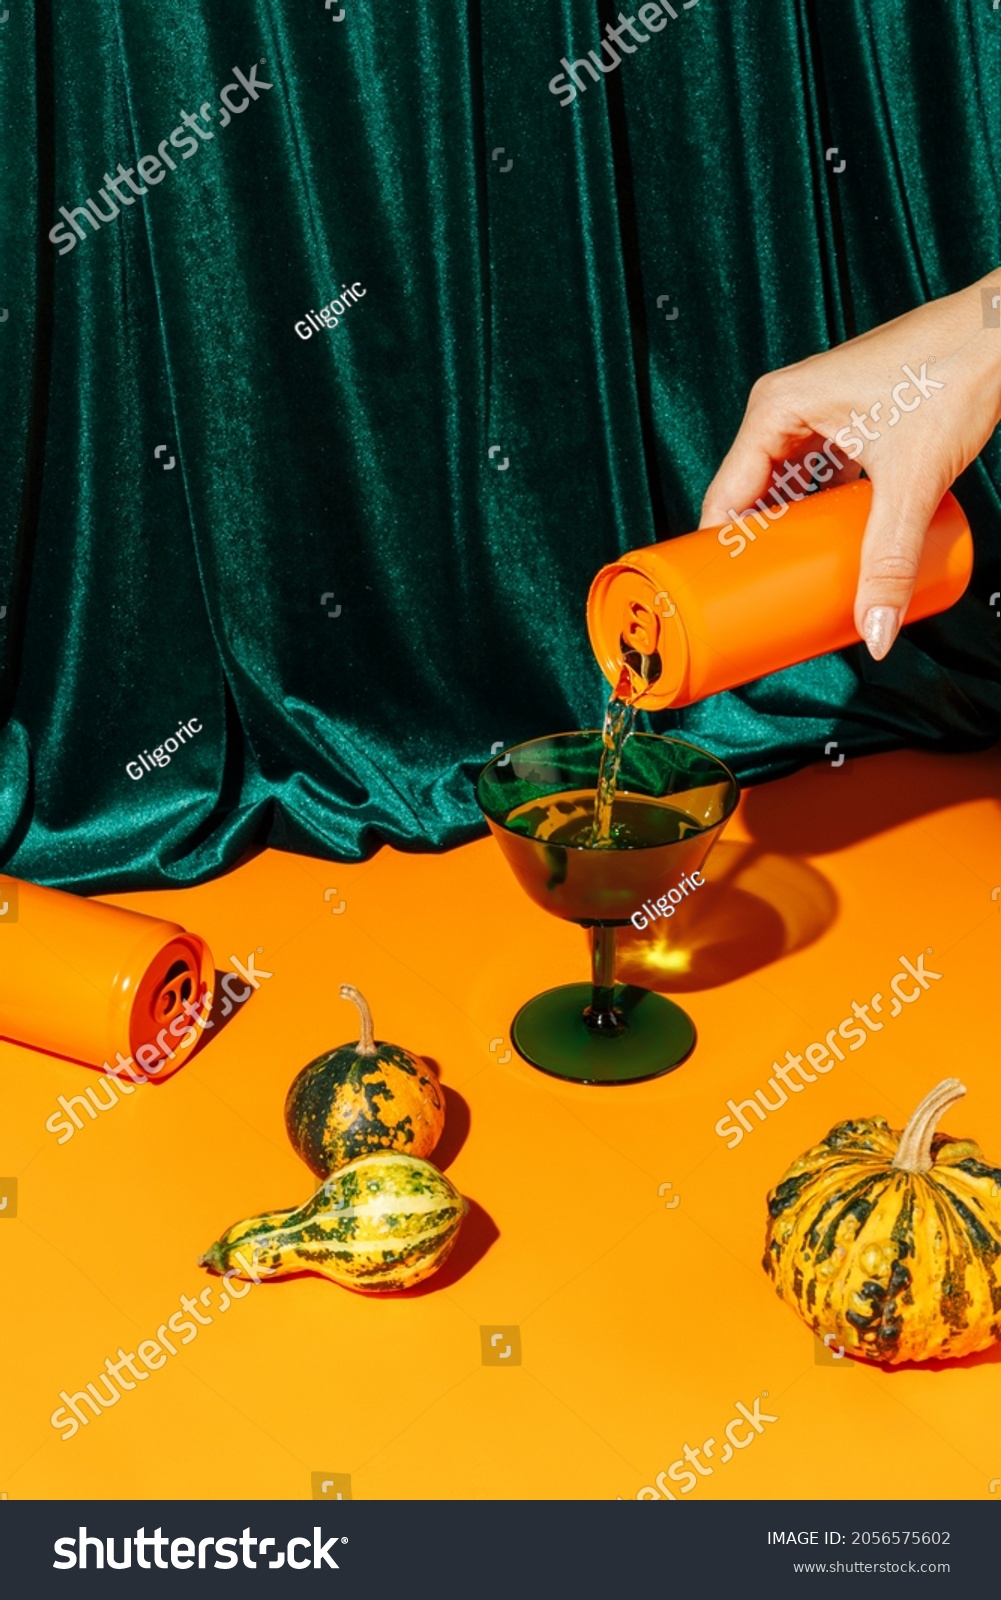 Orange pumpkins and a woman's hand pouring a beverage drink from an orange can against plush velvet curtain background. Creative Halloween and Thanksgiving concept. Contemporary fall still life idea. #2056575602